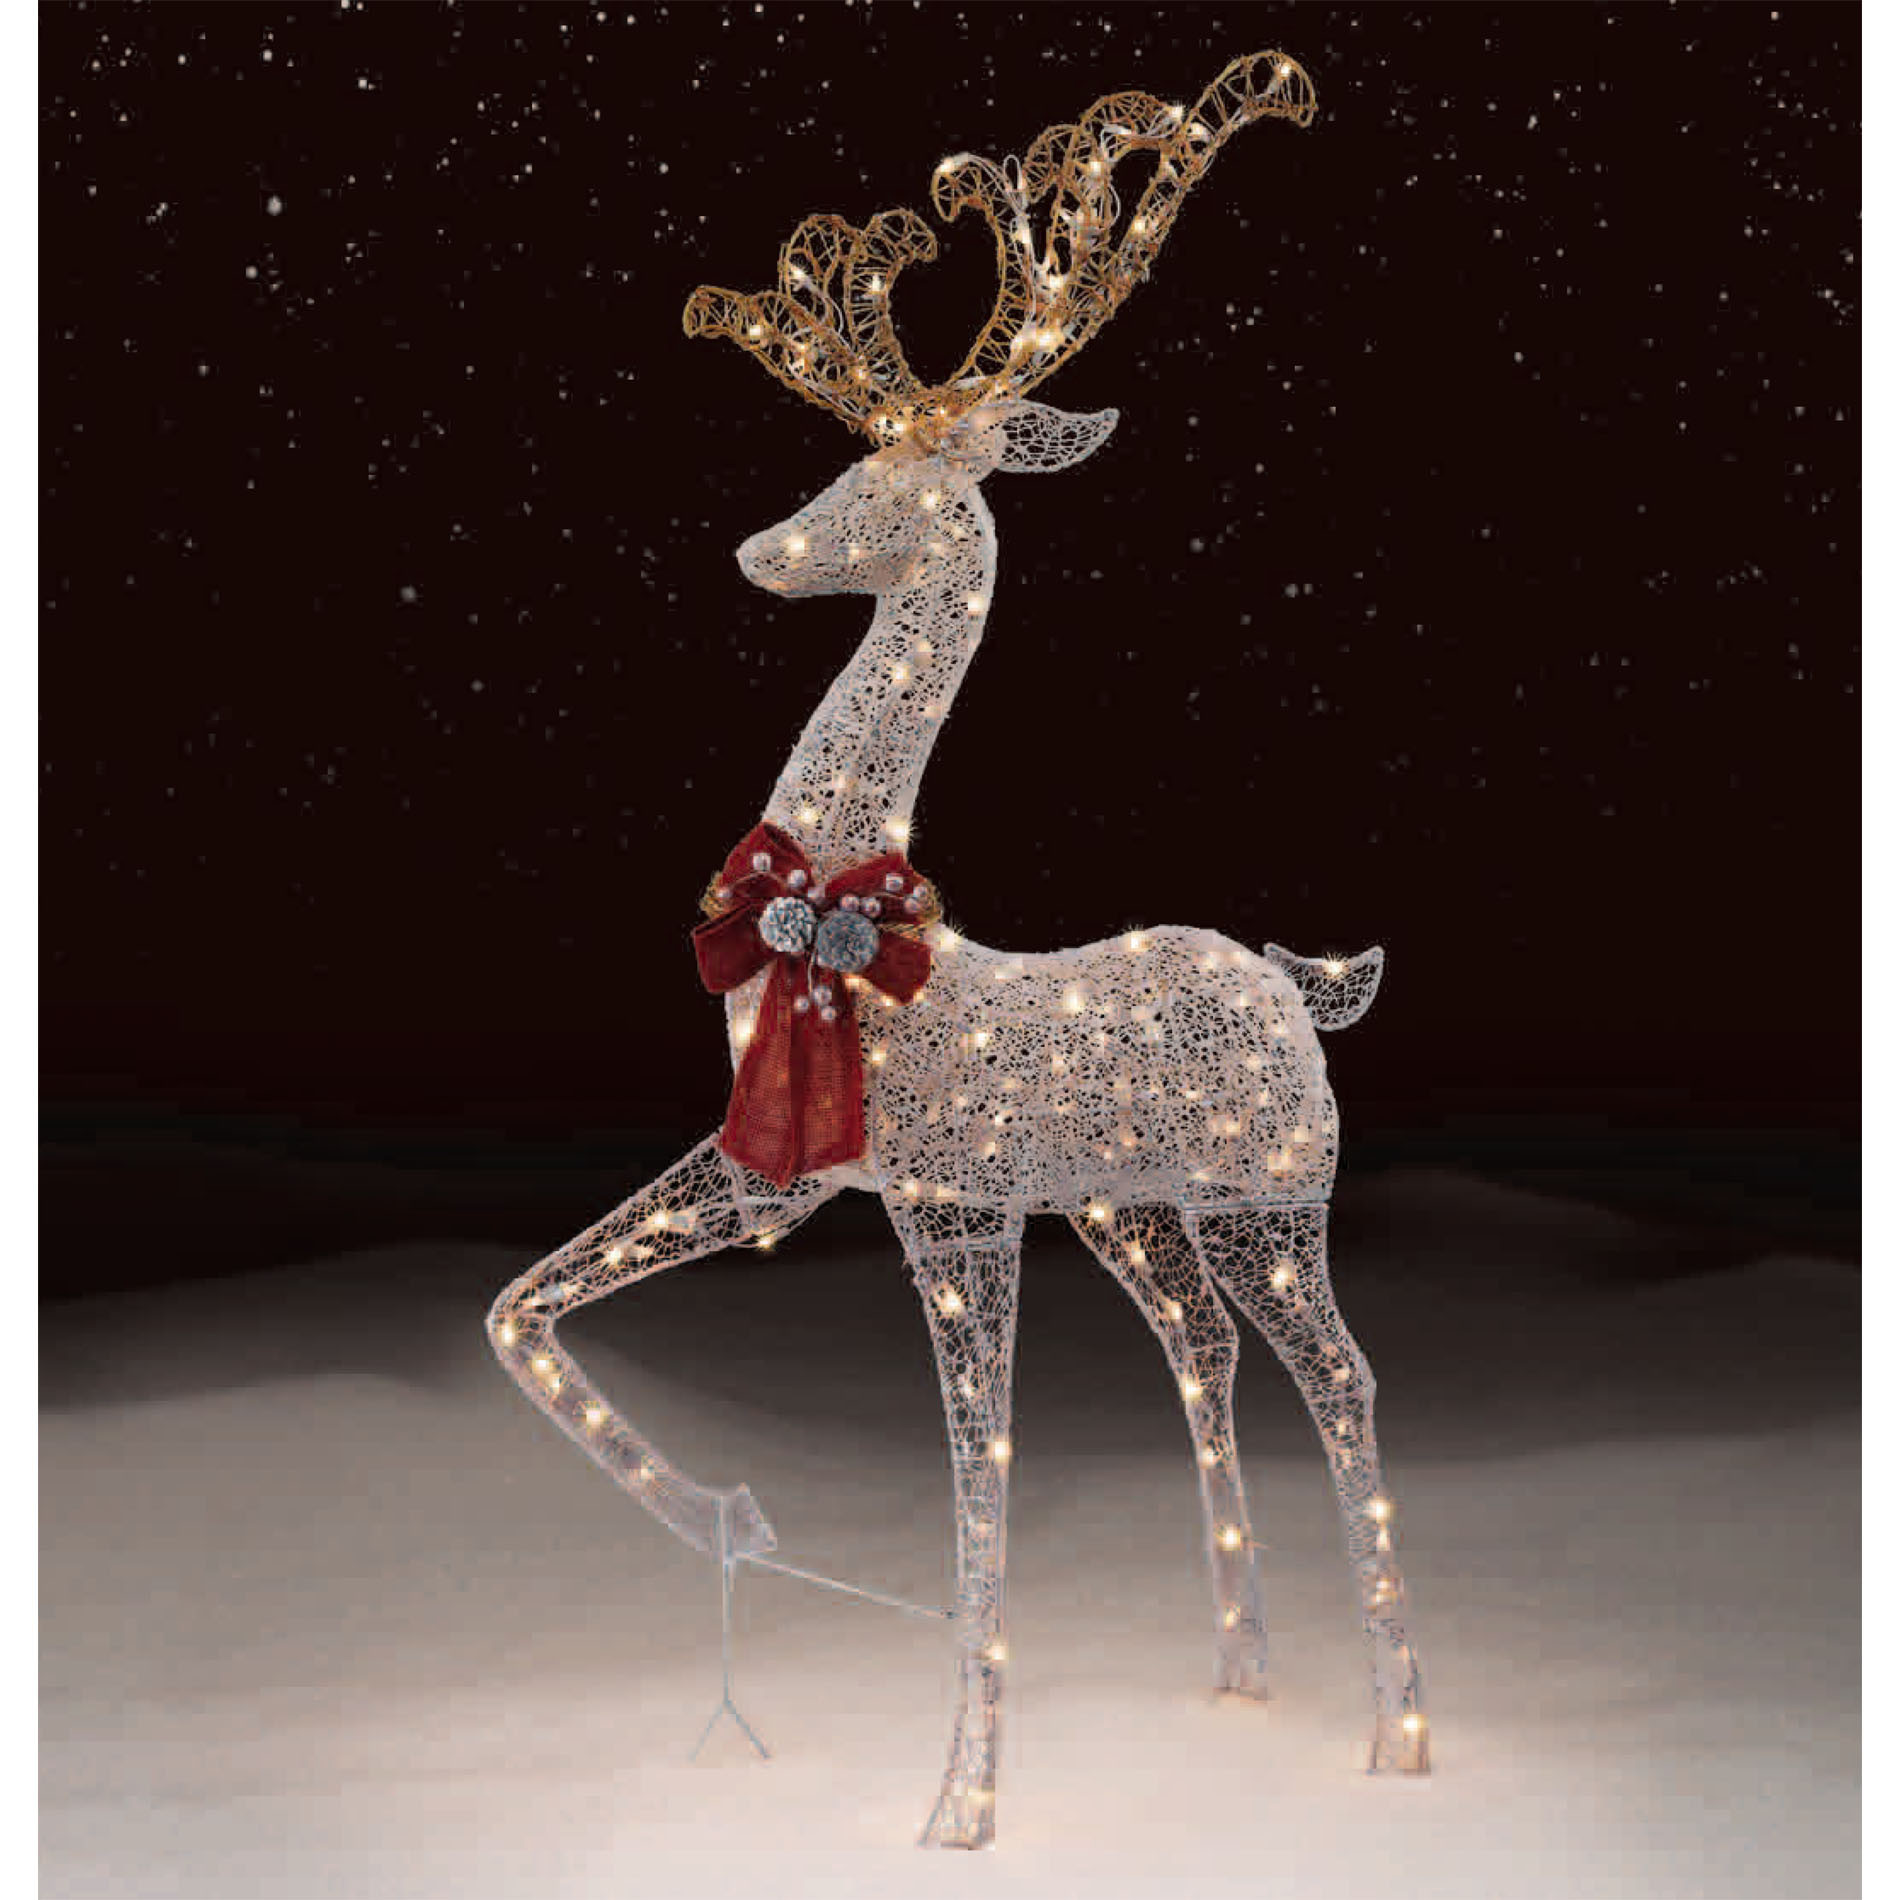 Christmas Deer Decorations Indoor
 Trimming Traditions Outdoor 200 Light Silver Mesh Standing